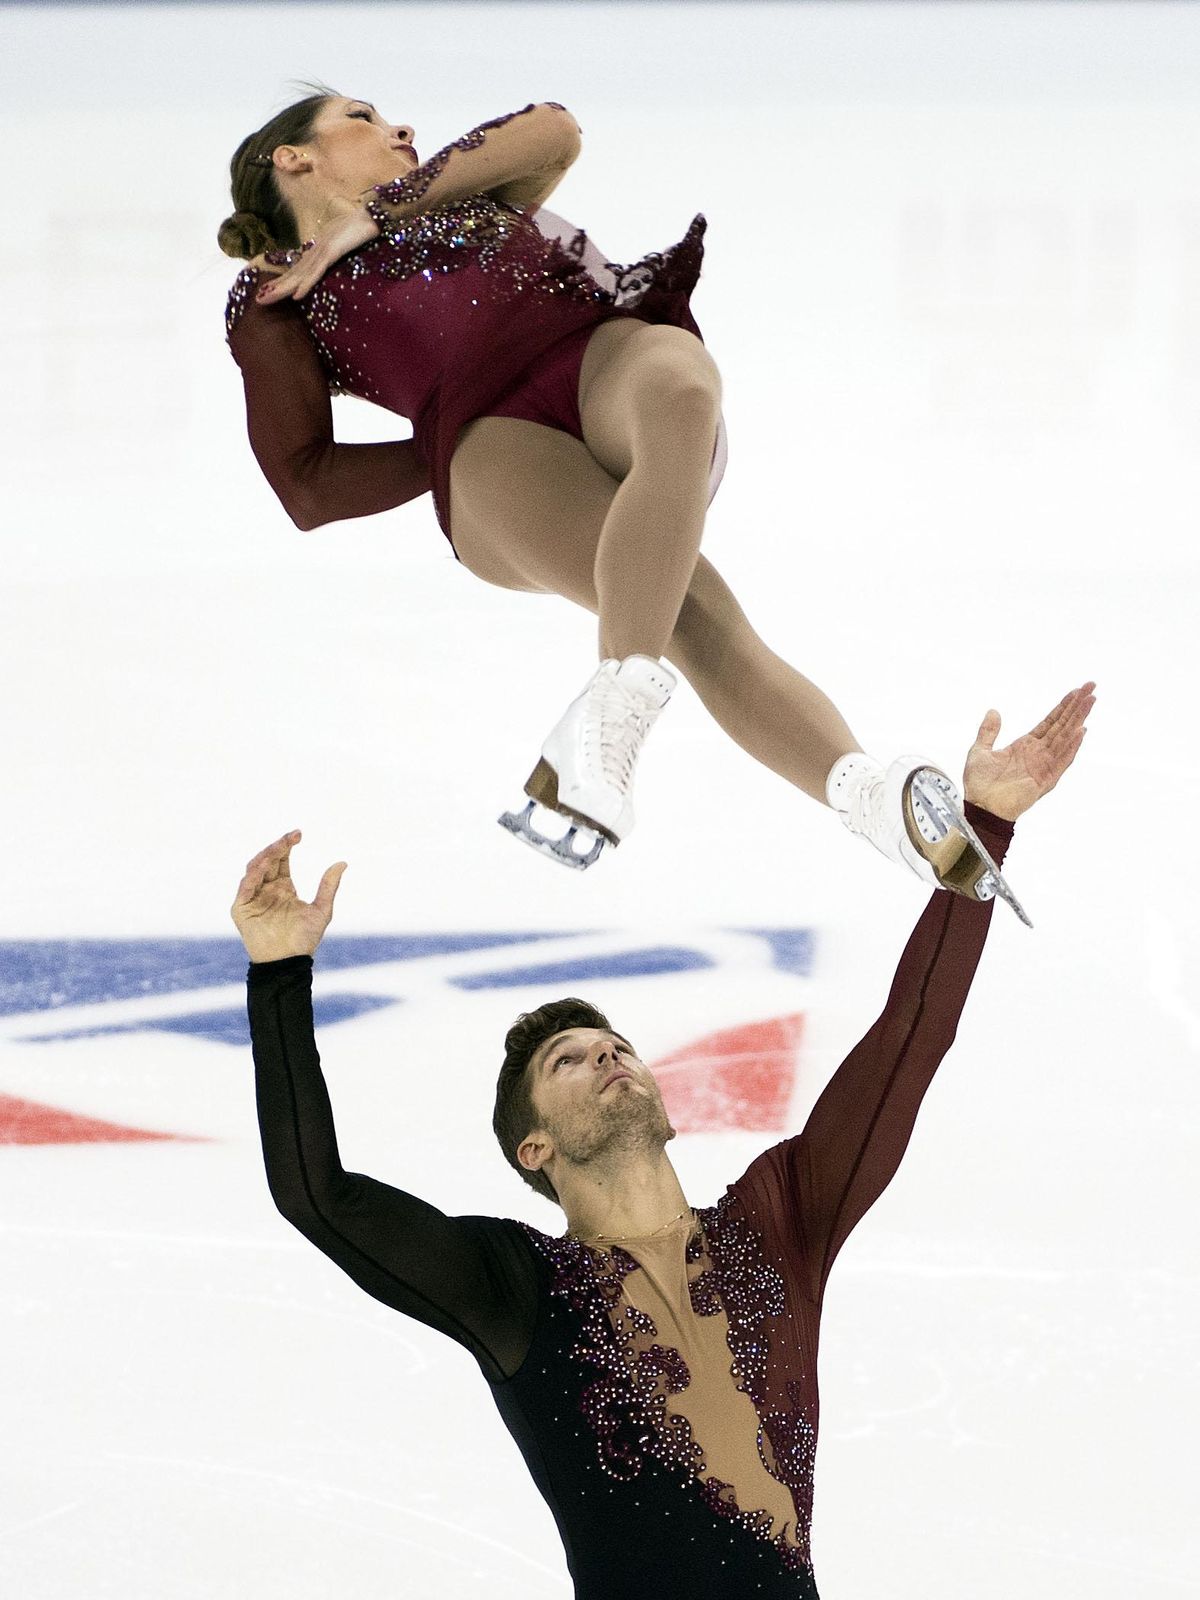 Italians Nicole Della Monica and Matteo Guarise perform a throw during their 2016 Team Challenge Cup pairs free skate program, Sat., April 23, 2016, at the Spokane Arena in Spokane, Wash. (Colin Mulvany / The Spokesman-Review)